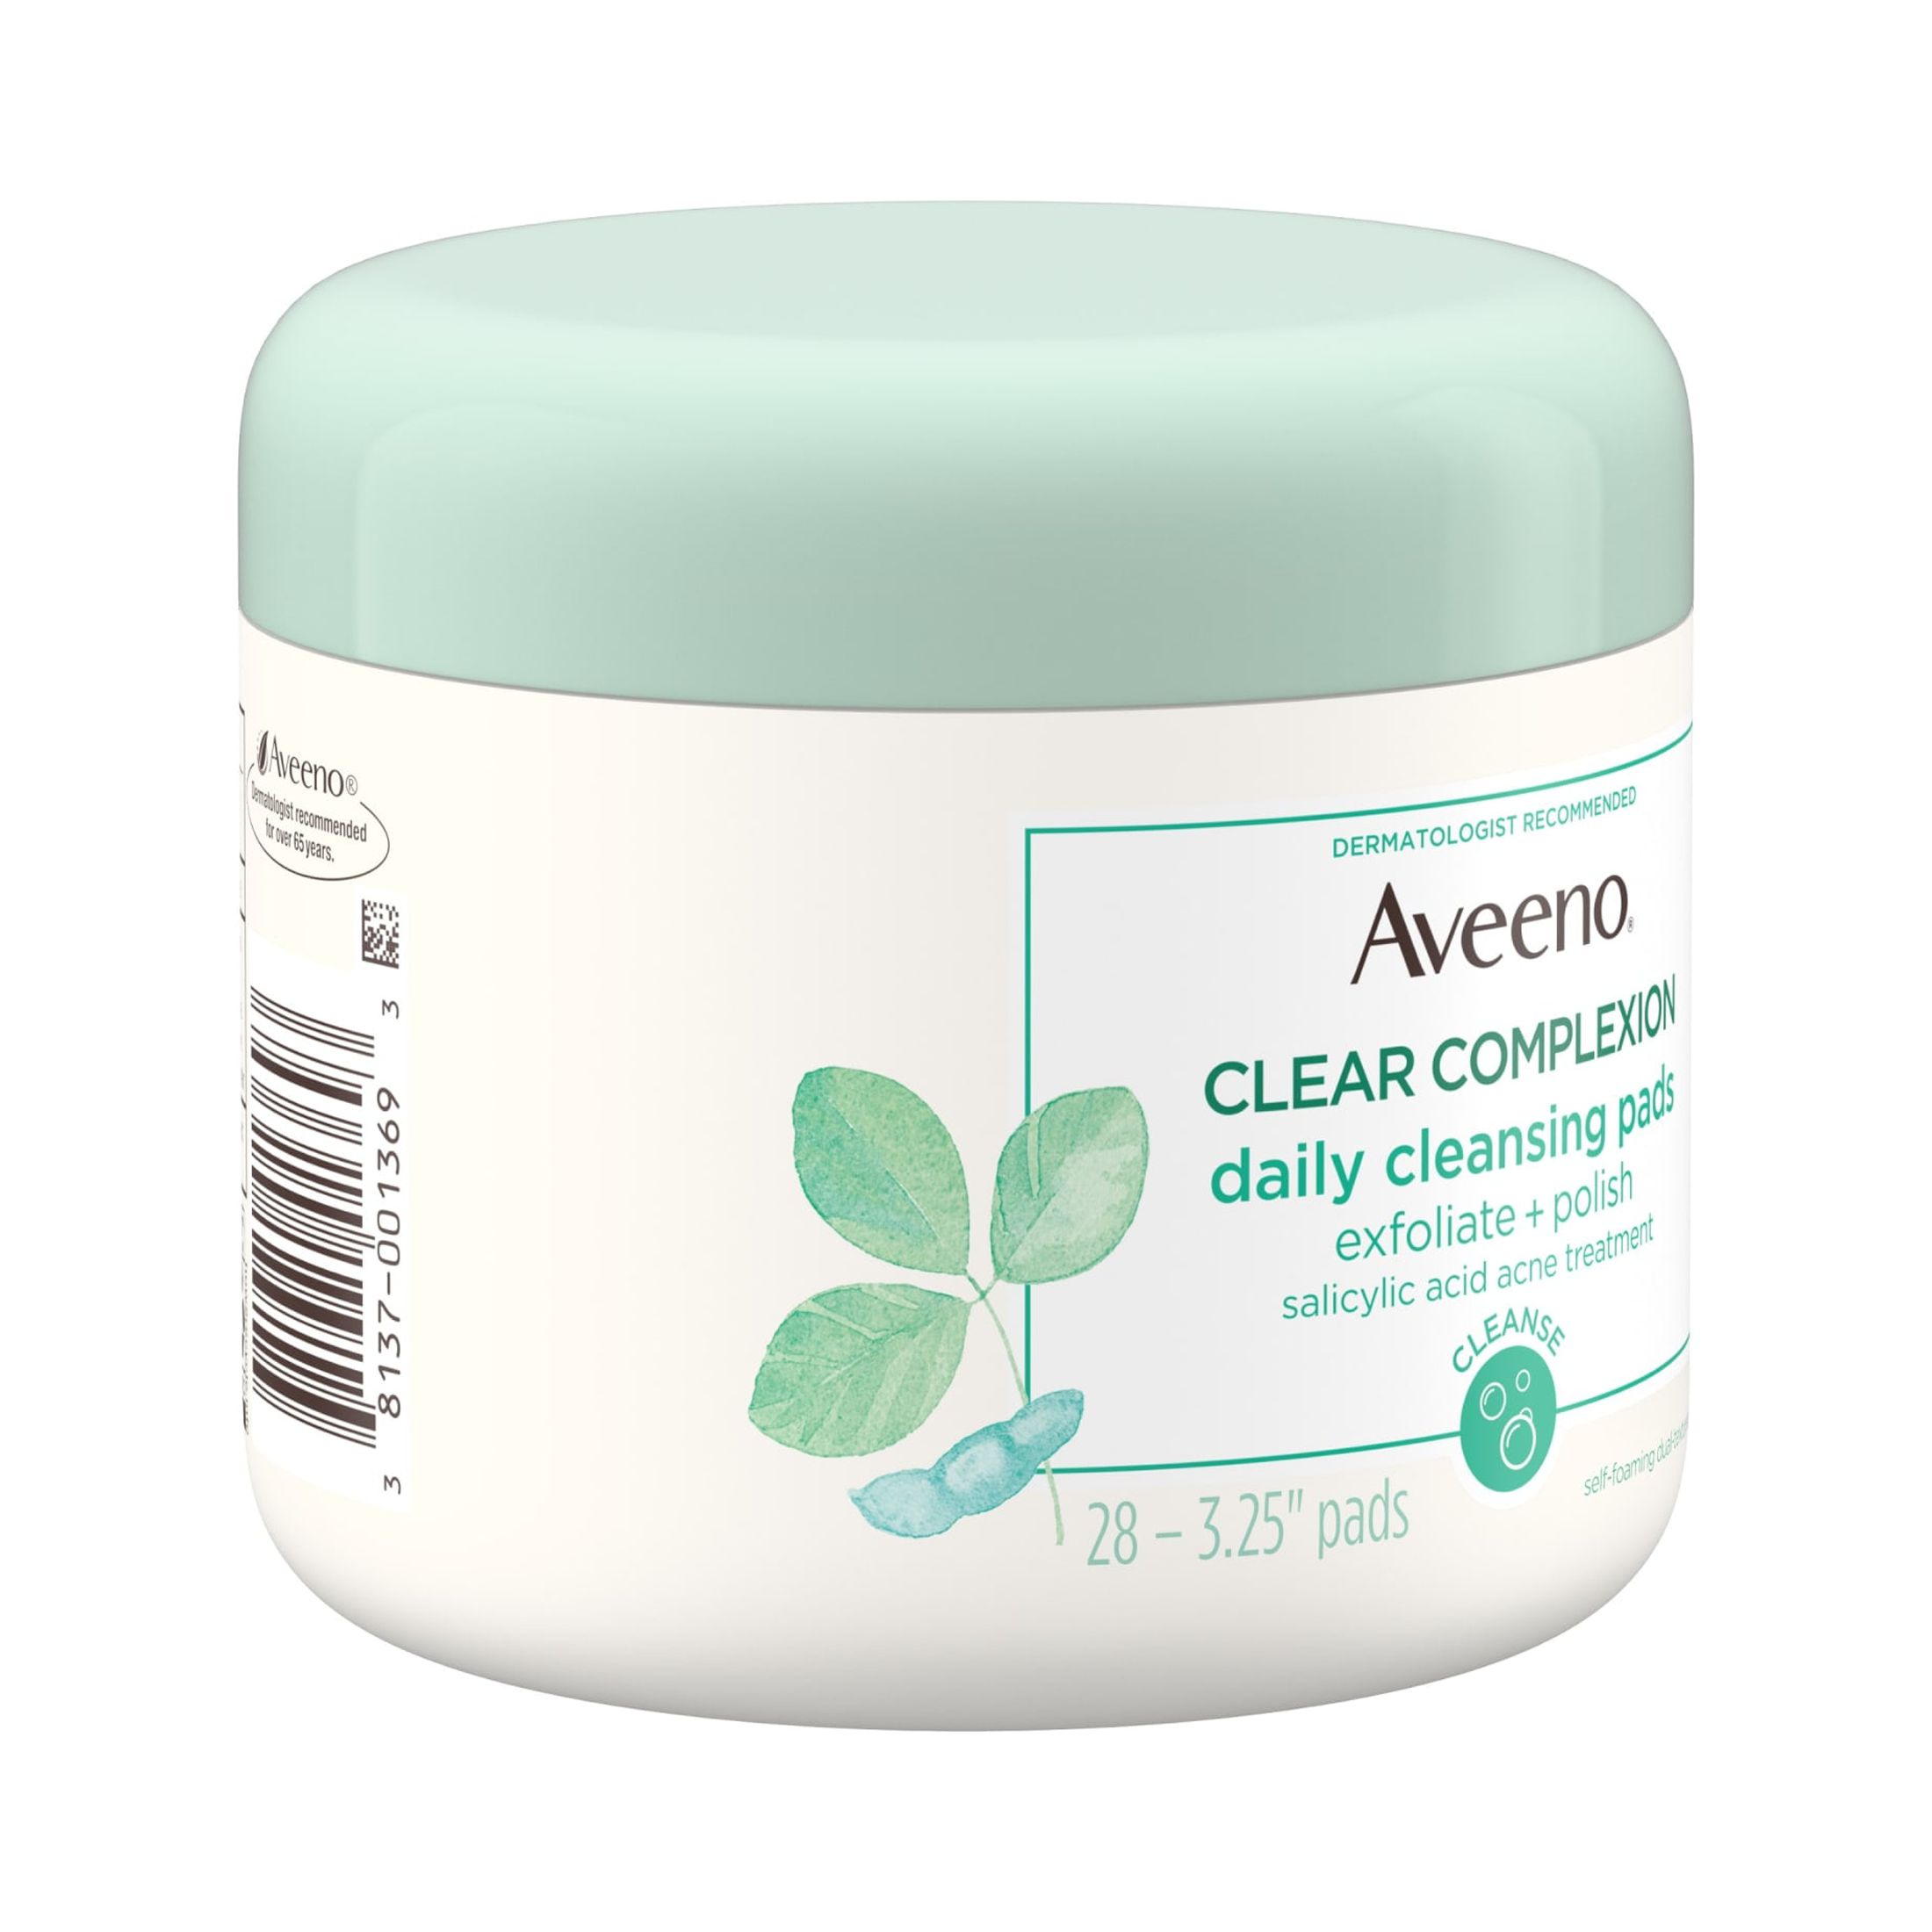 Aveeno Clear Complexion Acne Cleansing Pads, Salicylic Acid, 28 ct - image 3 of 8